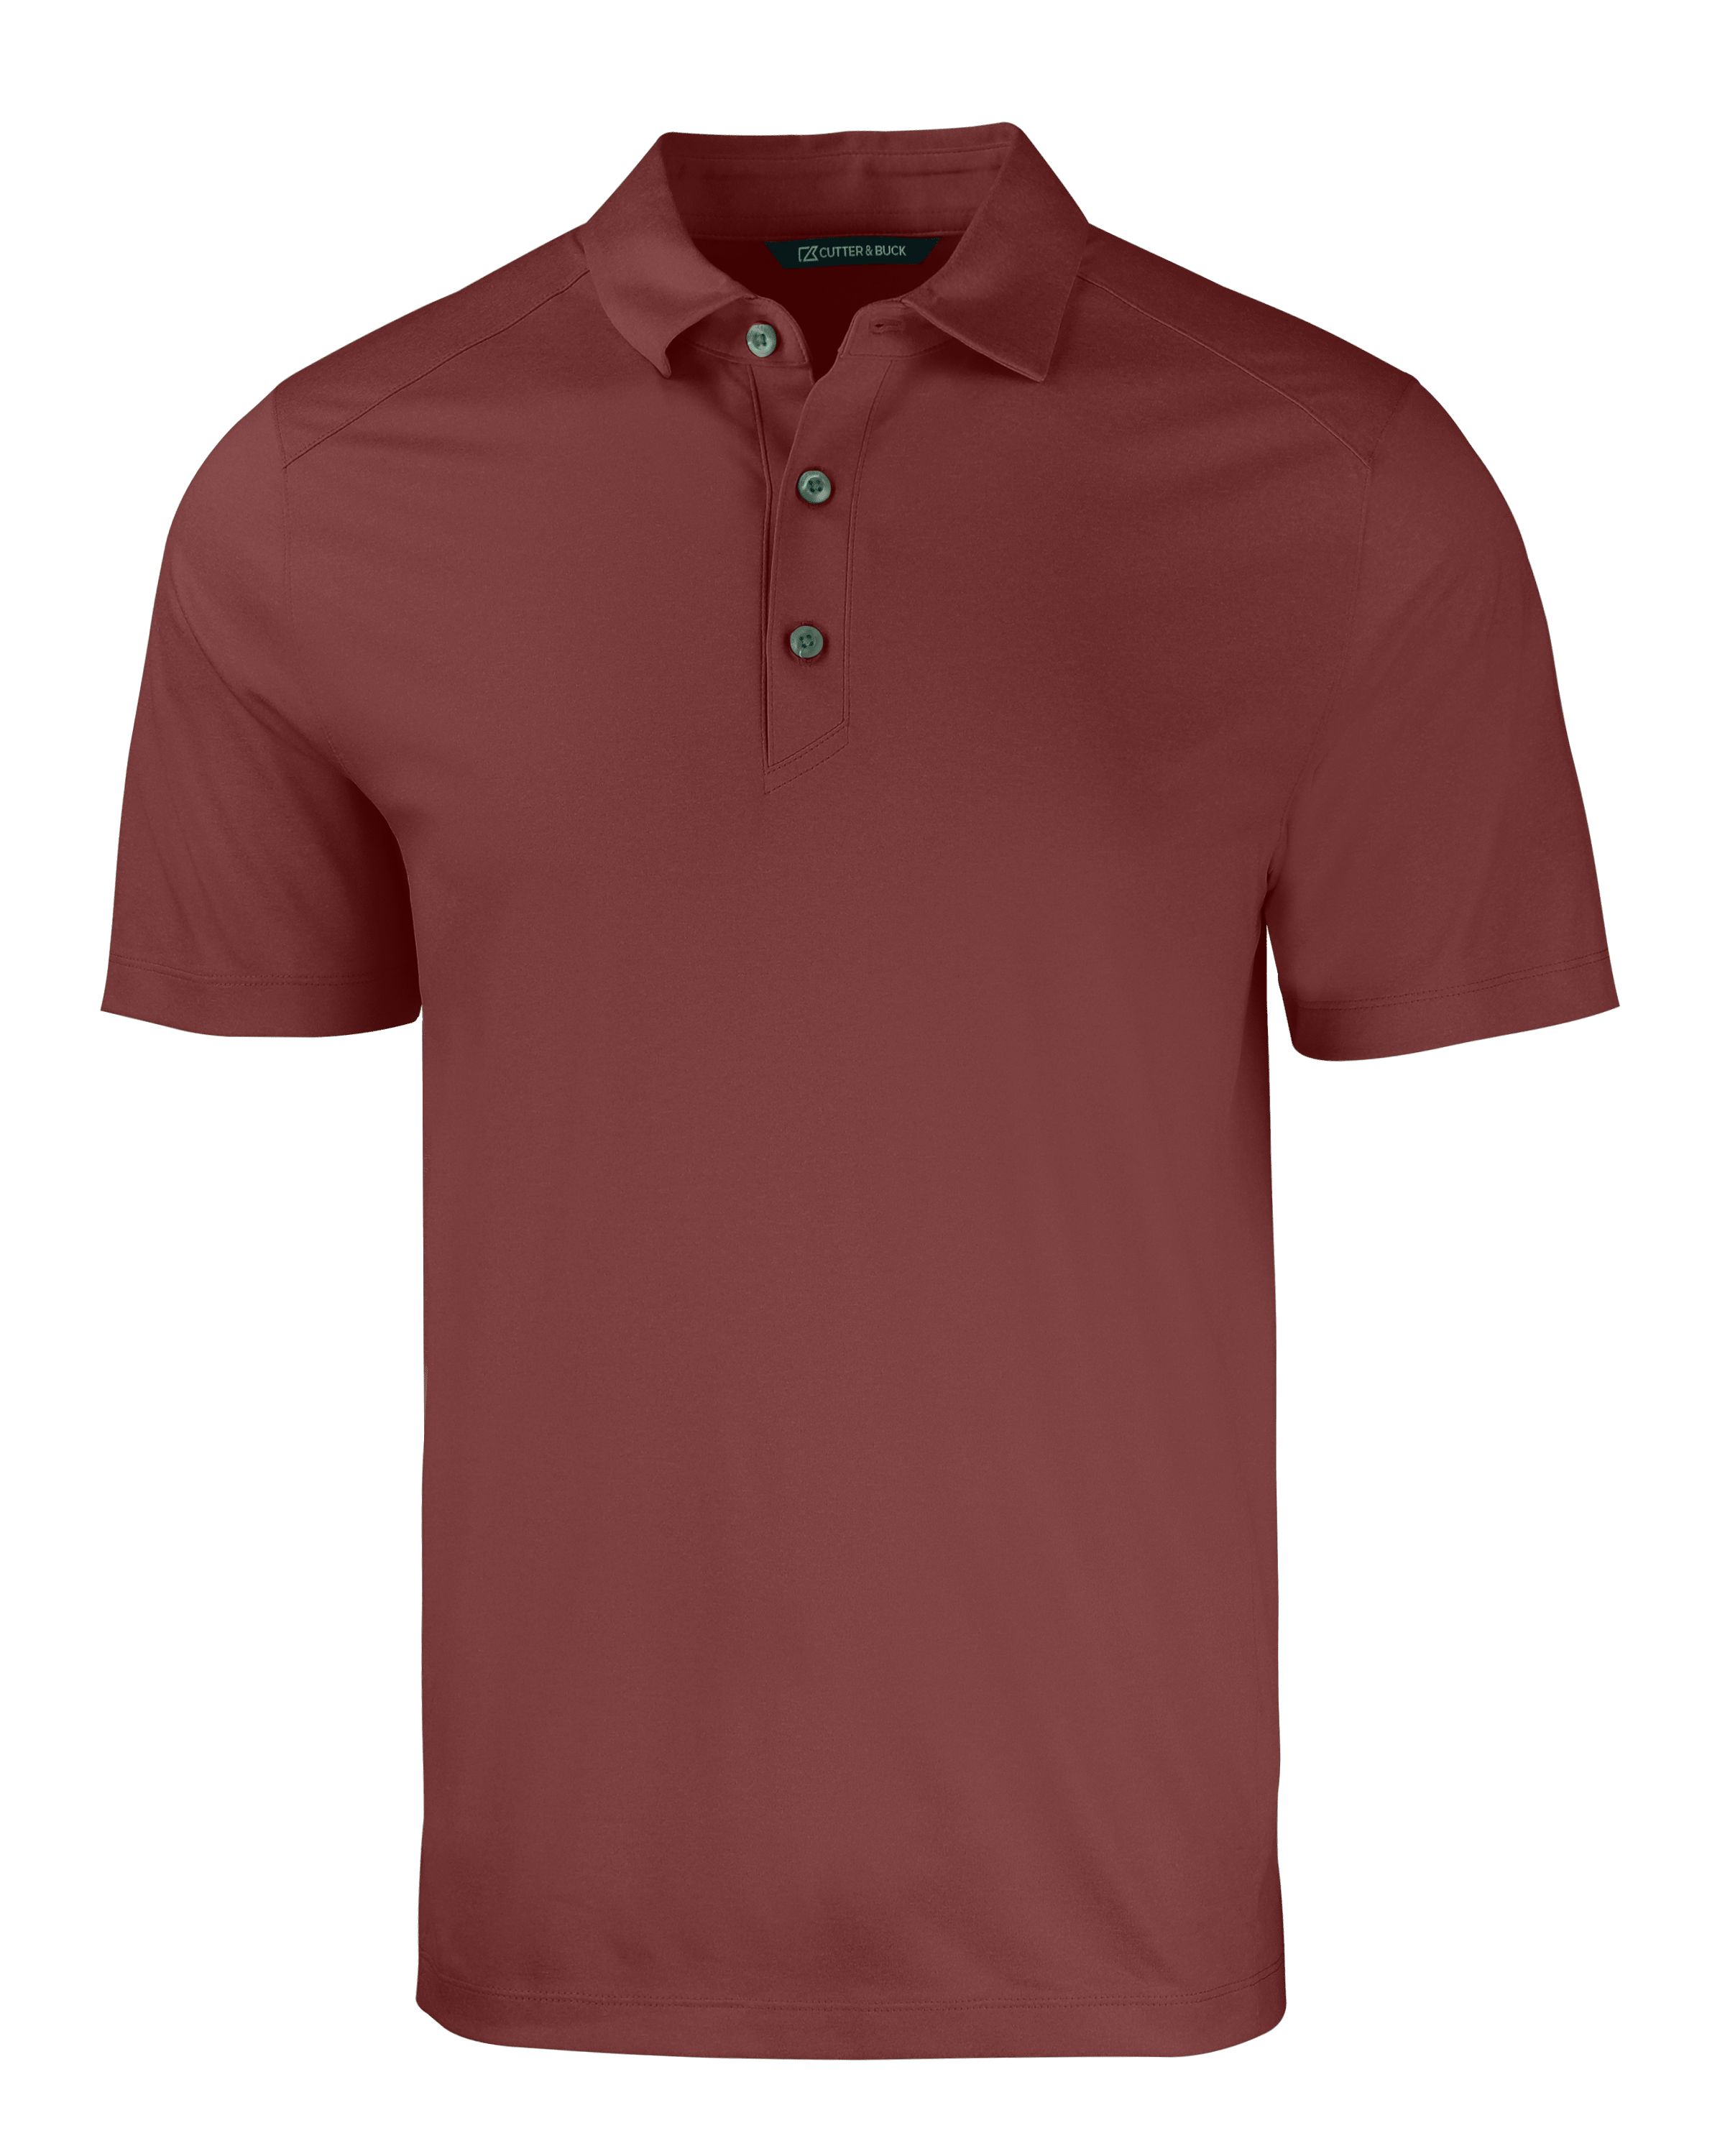 click to view Dark Bordeaux Heather(DBRH)